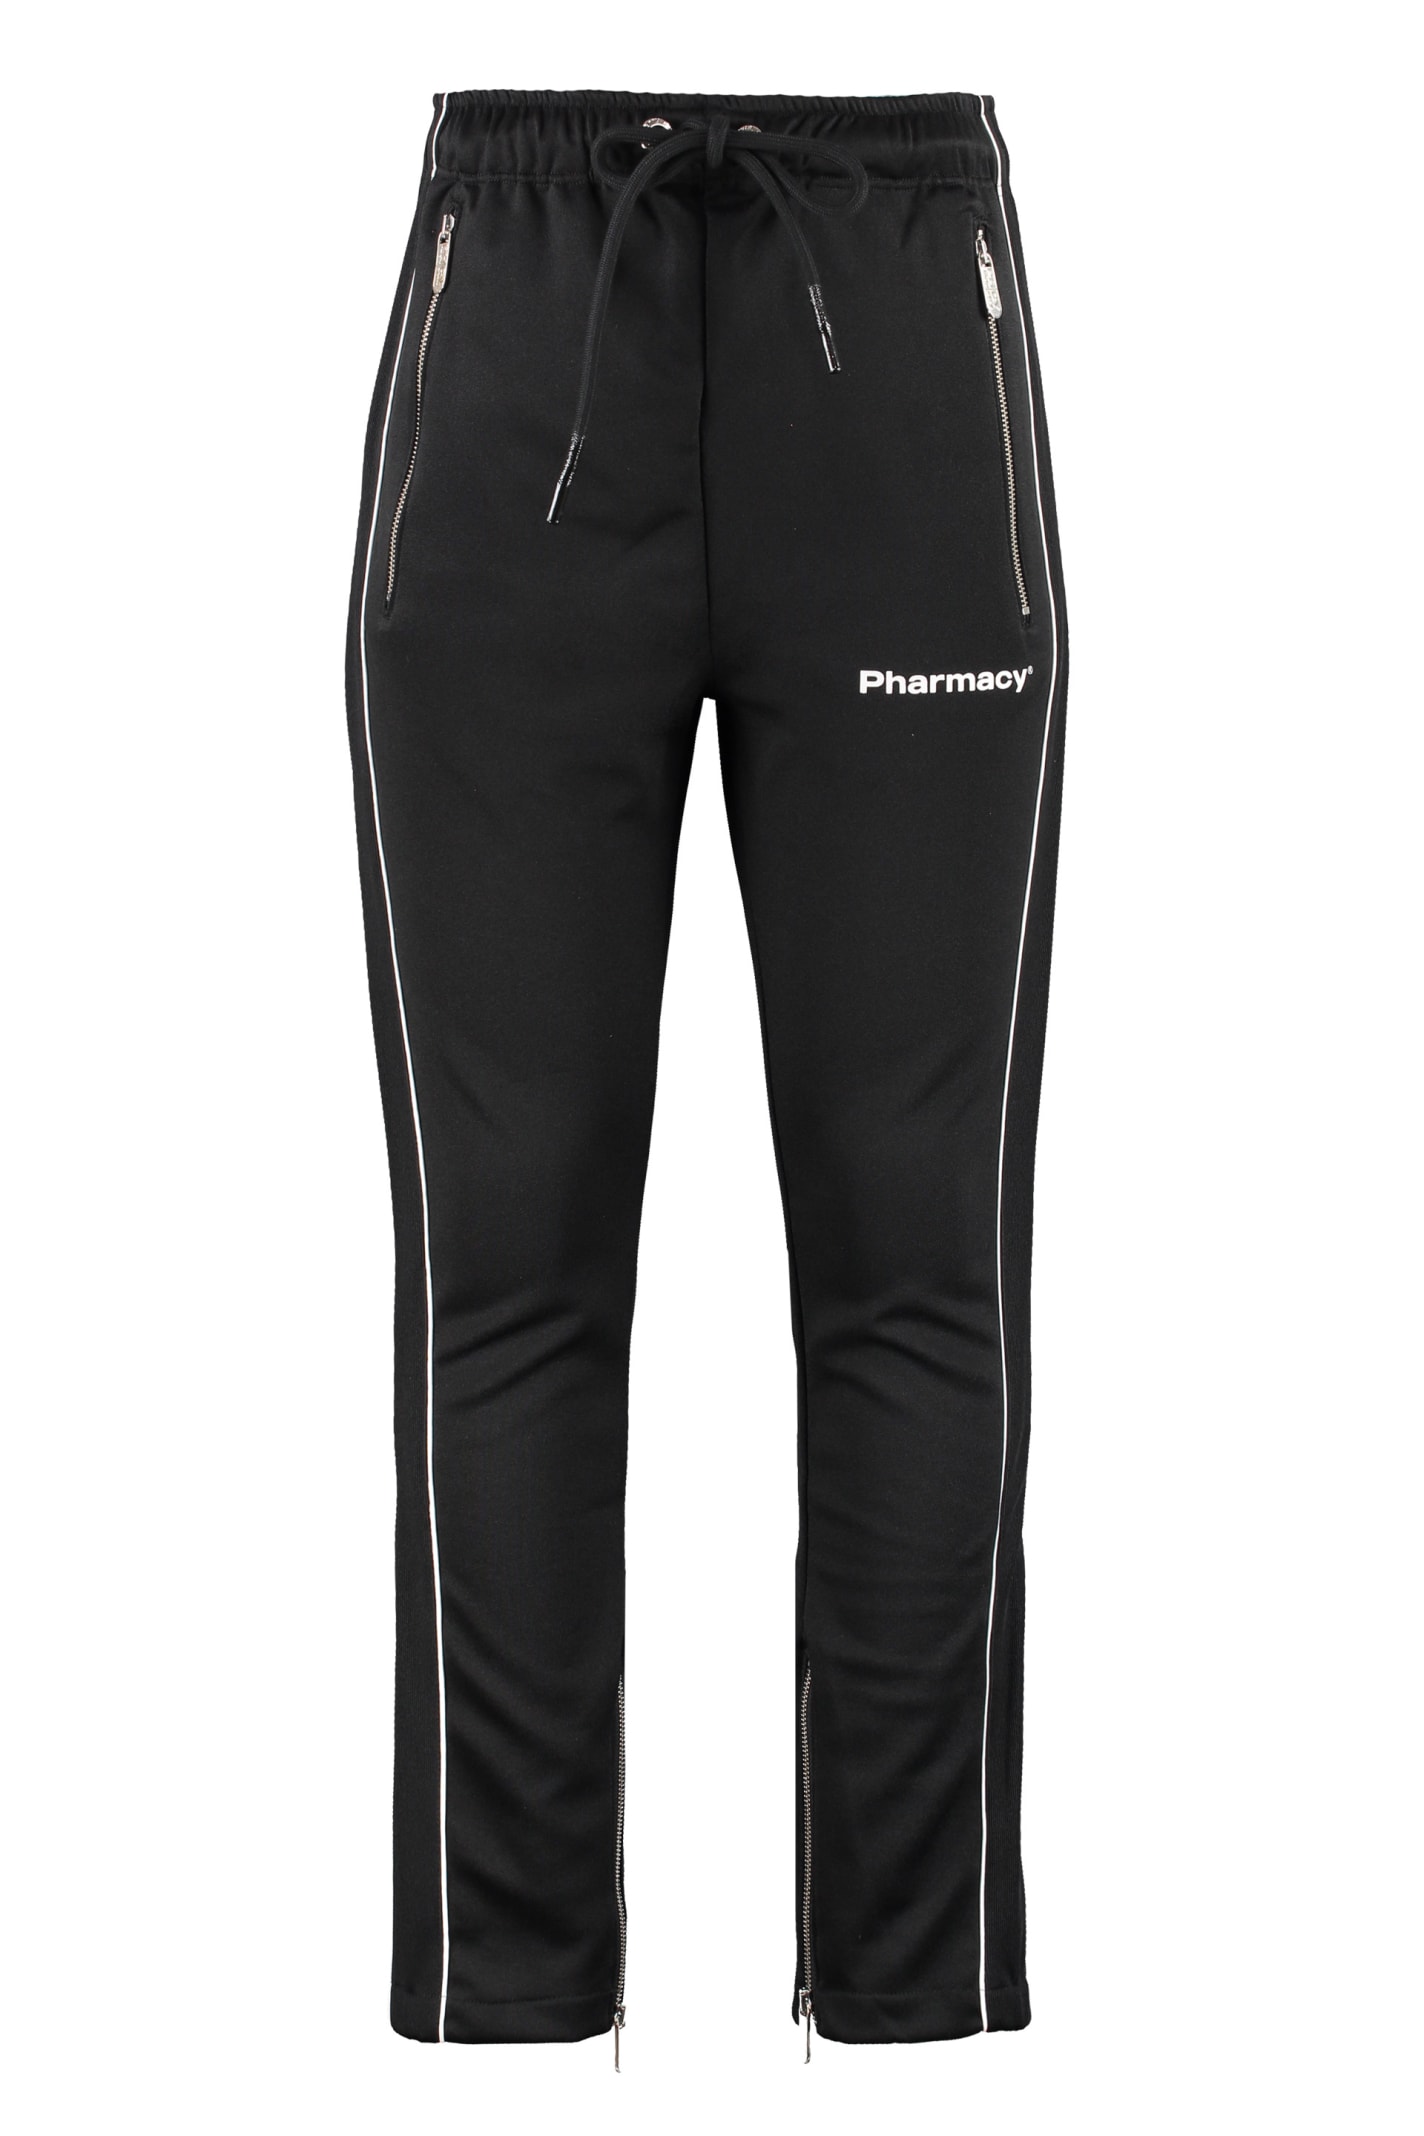 Pharmacy Industry Stretch Cotton Track-pants